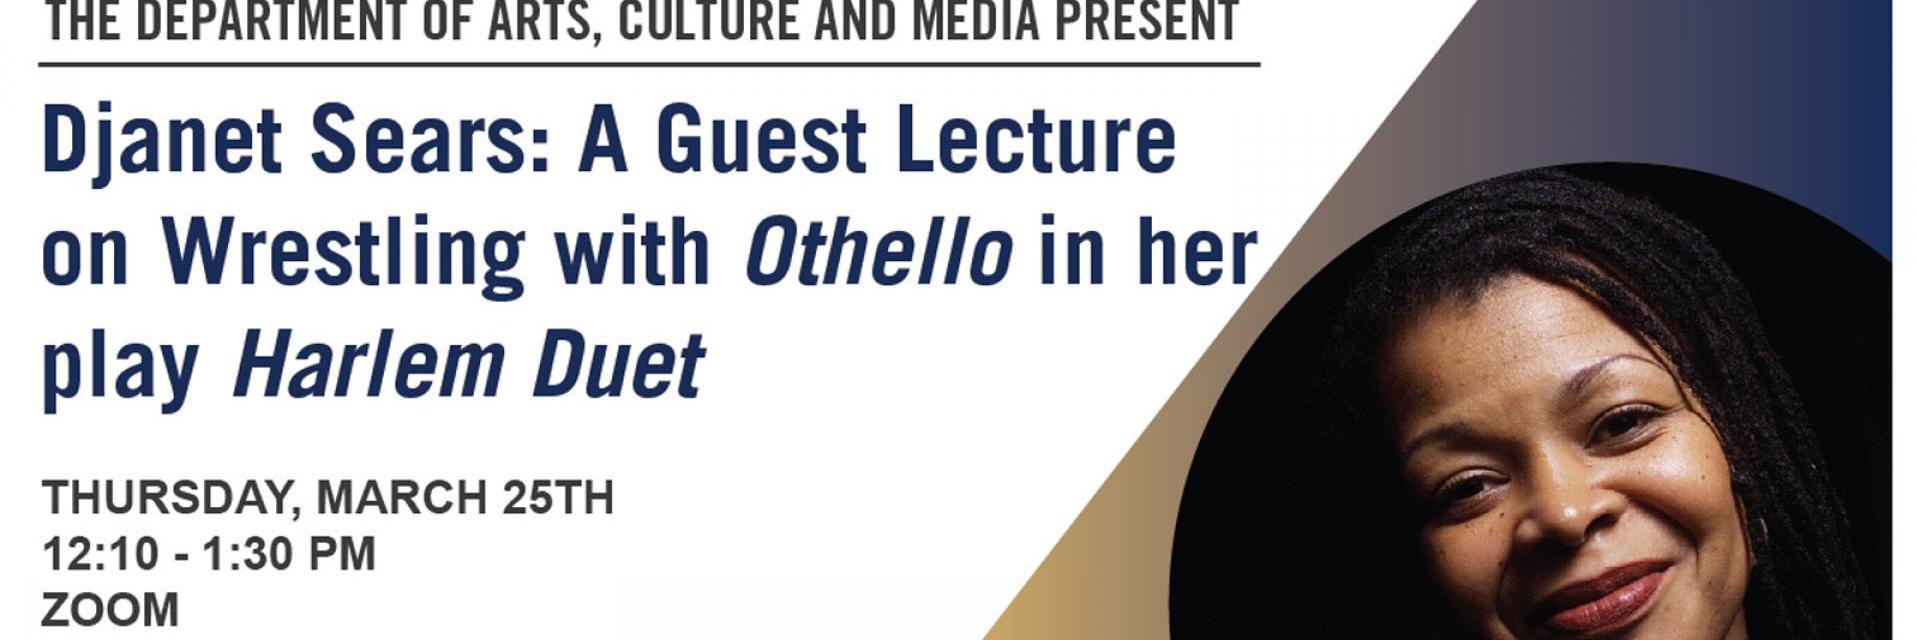 Djanet Sears: A guest lecture on wrestling with Othello in her play Harlem Duet Banner